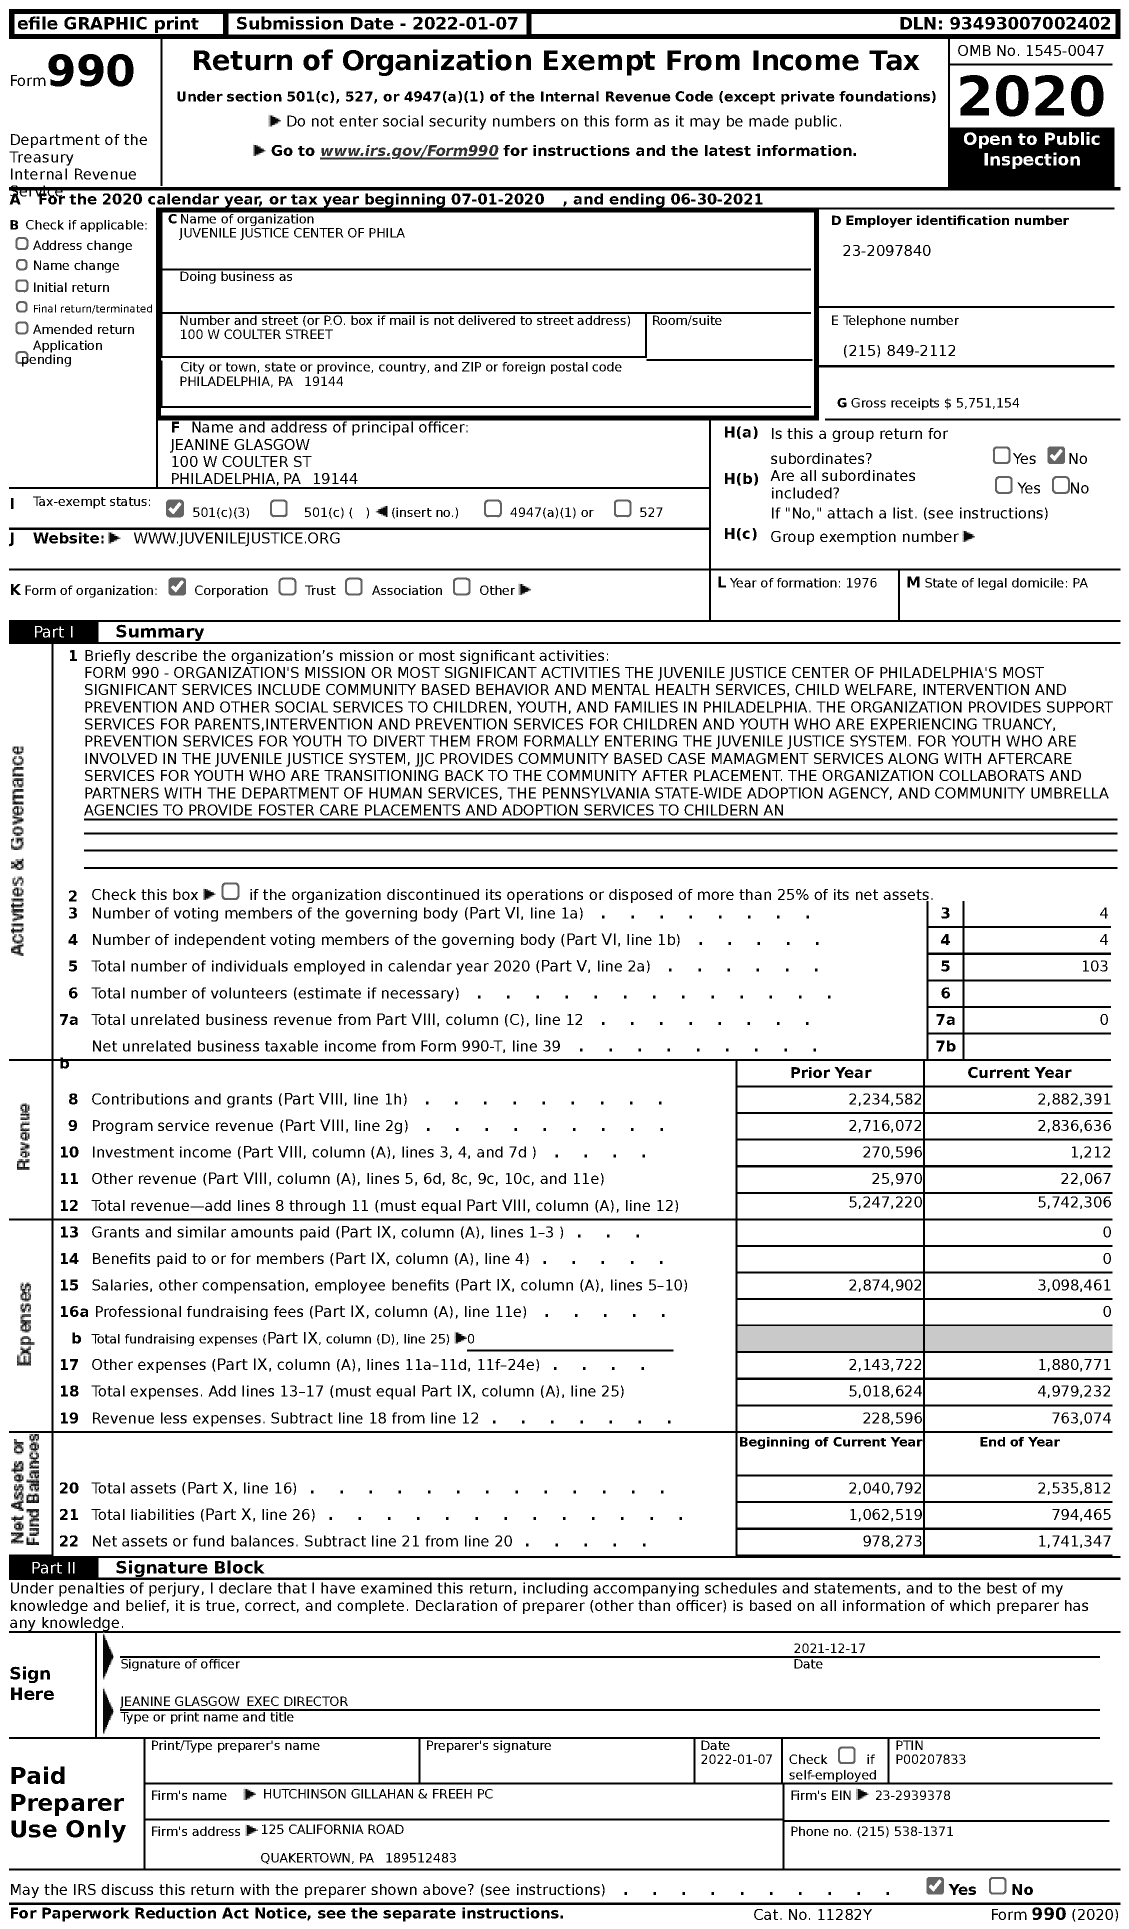 Image of first page of 2020 Form 990 for Juvenile Justice Center of Philadelphia (JJC)